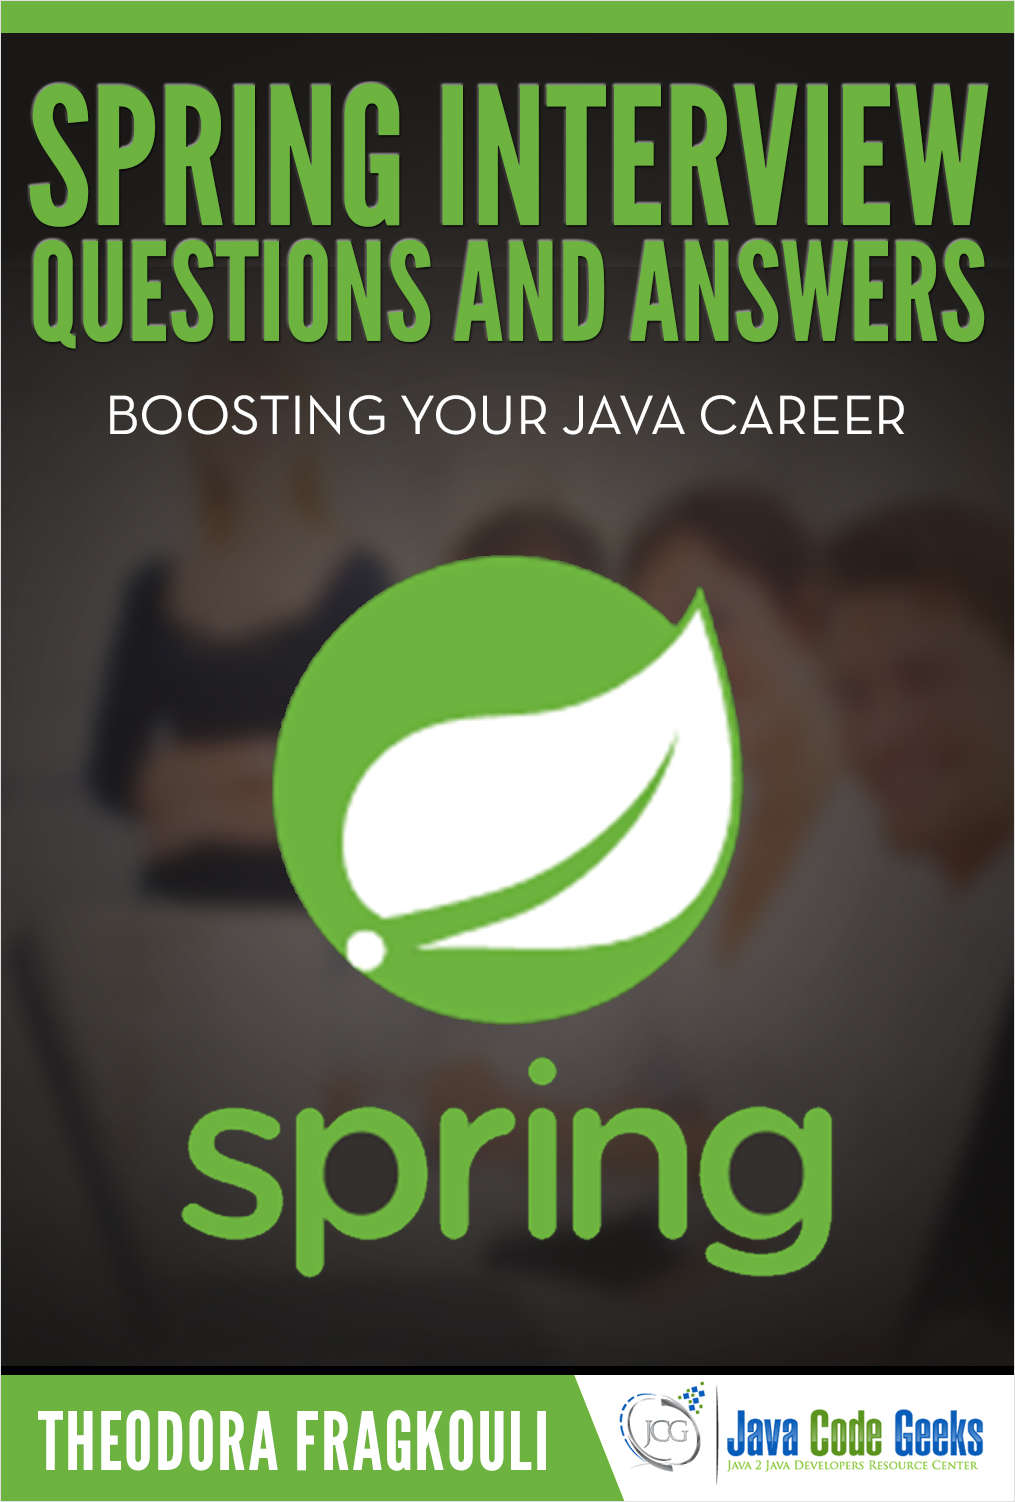 Spring Interview Questions and Answers pdf